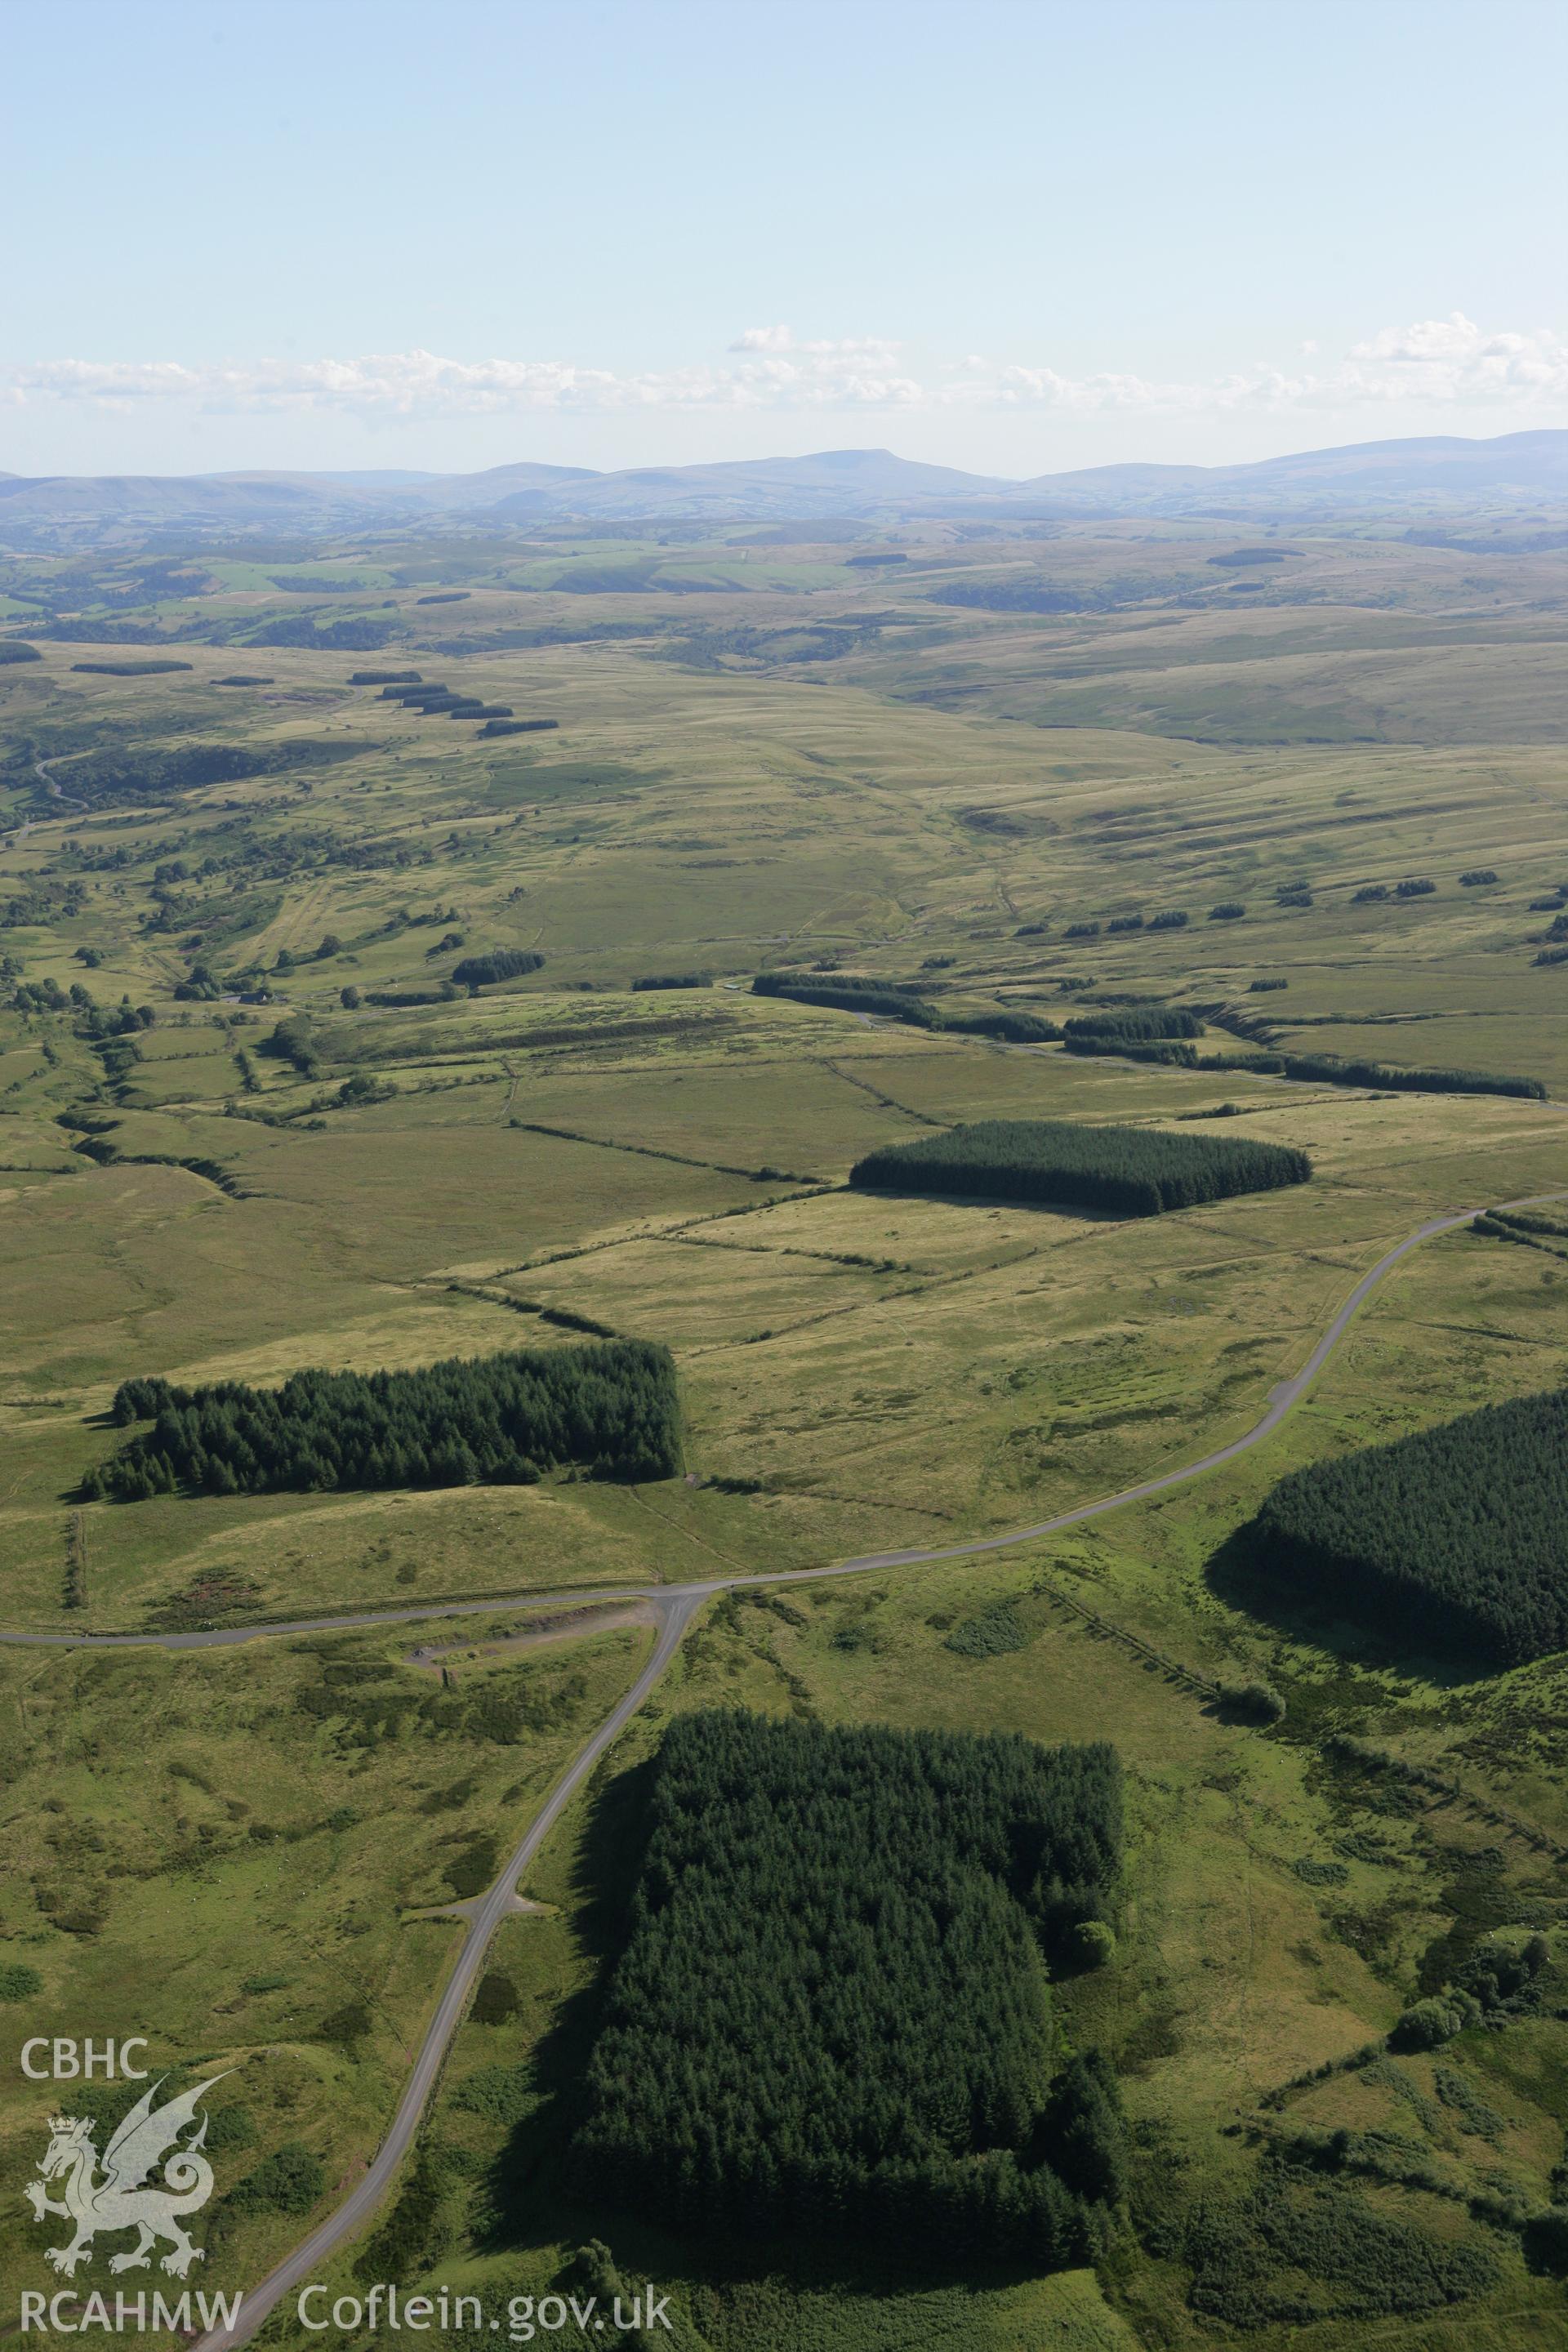 RCAHMW colour oblique aerial photograph of Sennybridge Military Training Area, Mynydd Epynt, looking south-west and showing the Cefn Corast landscape. Taken on 08 August 2007 by Toby Driver